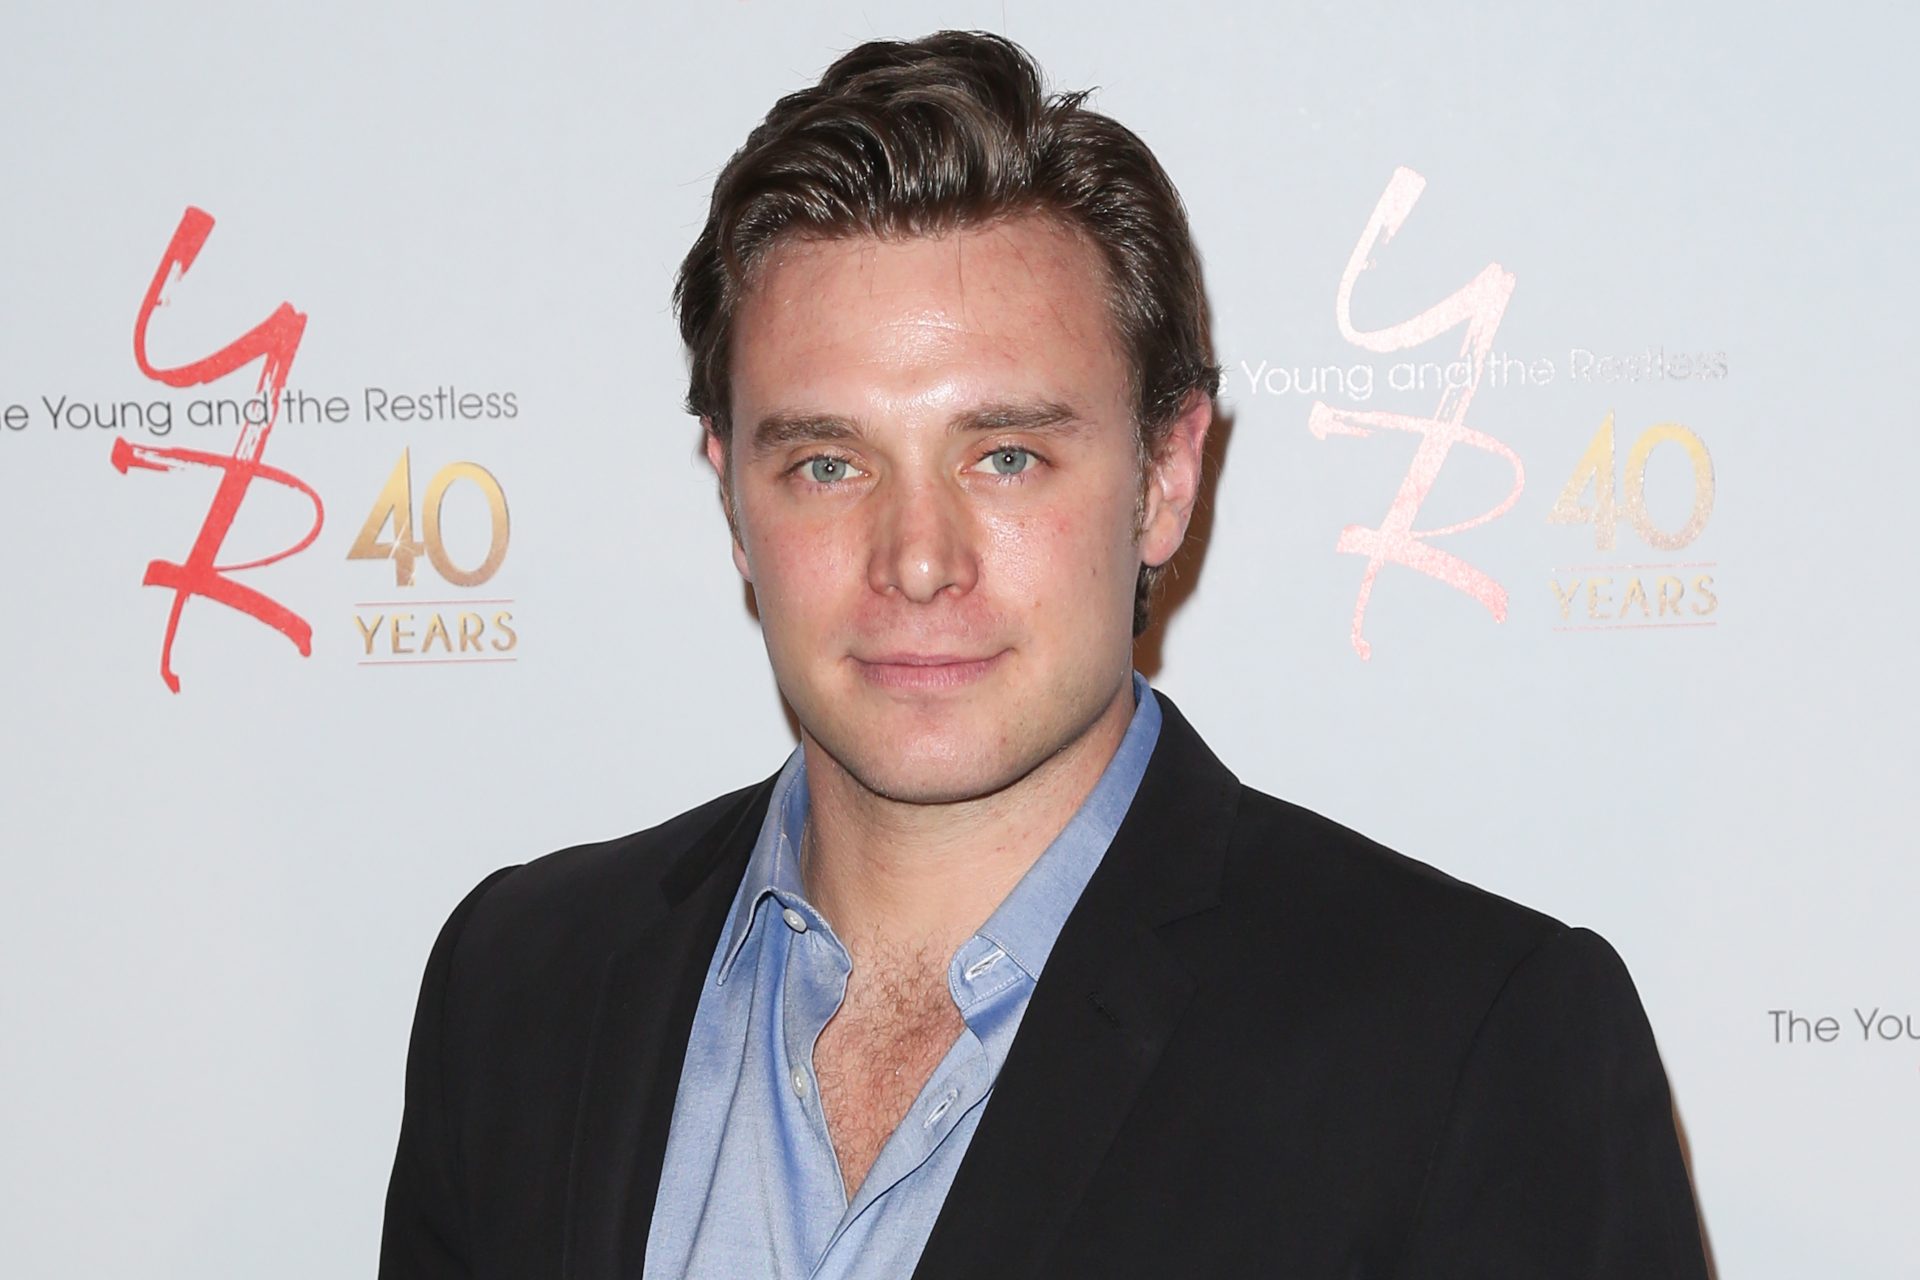 Stars we lost in 2023: 'Young and Restless' actor Billy Miller, 44